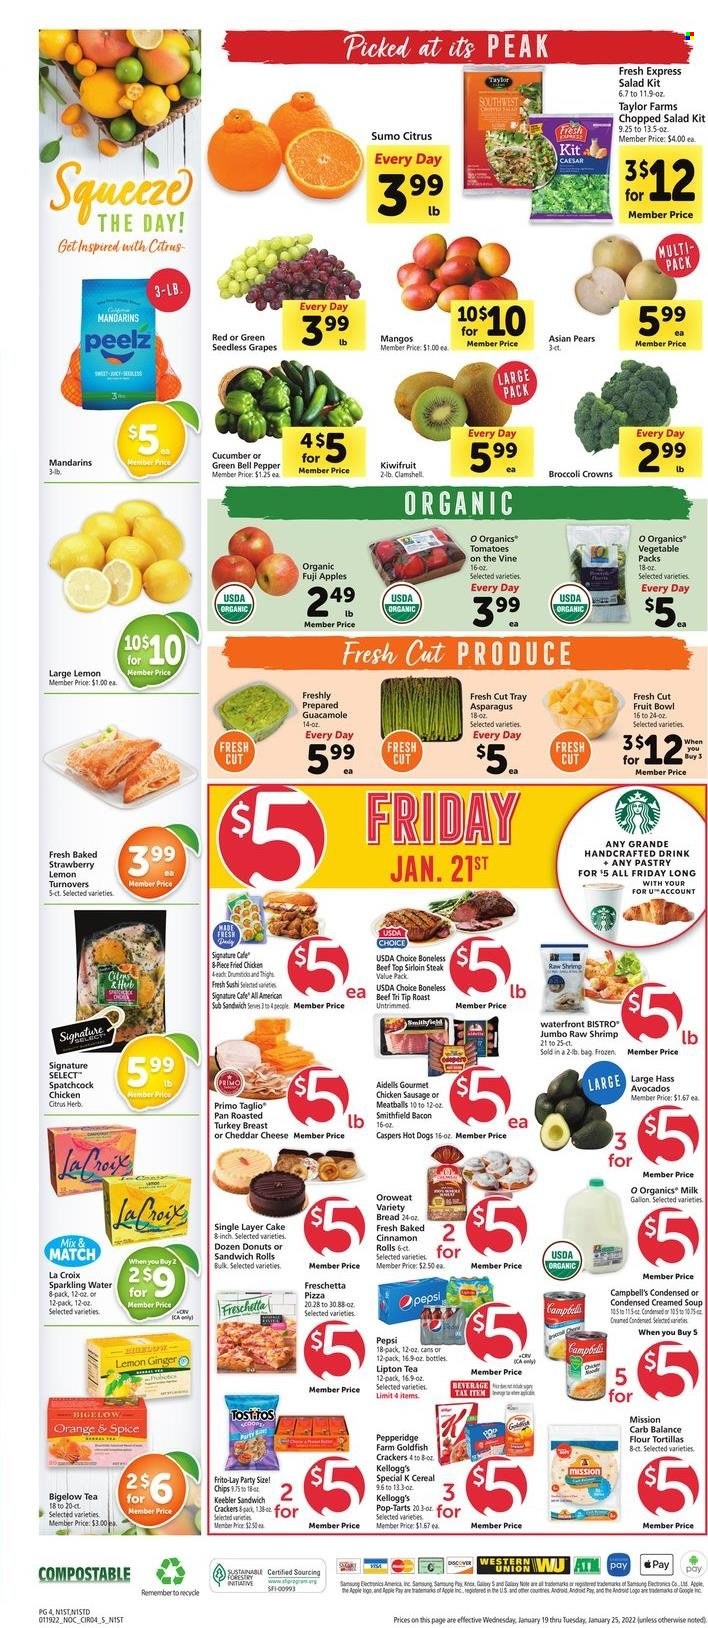 thumbnail - Safeway Flyer - 01/19/2022 - 01/25/2022 - Sales products - seedless grapes, bread, tortillas, turnovers, flour tortillas, sandwich rolls, cinnamon roll, donut, asparagus, bell peppers, salad, chopped salad, apples, grapes, kiwi, mandarines, pears, oranges, Fuji apple, spatchcock chicken, beef sirloin, steak, sirloin steak, shrimps, Campbell's, hot dog, pizza, meatballs, soup, fried chicken, bacon, sausage, chicken sausage, organic milk, crackers, Kellogg's, Pop-Tarts, Keebler, Goldfish, Frito-Lay, guacamole, cereals, spice, Pepsi, Lipton, sparkling water, tea, tray, pan, bowl, sumo citrus. Page 4.